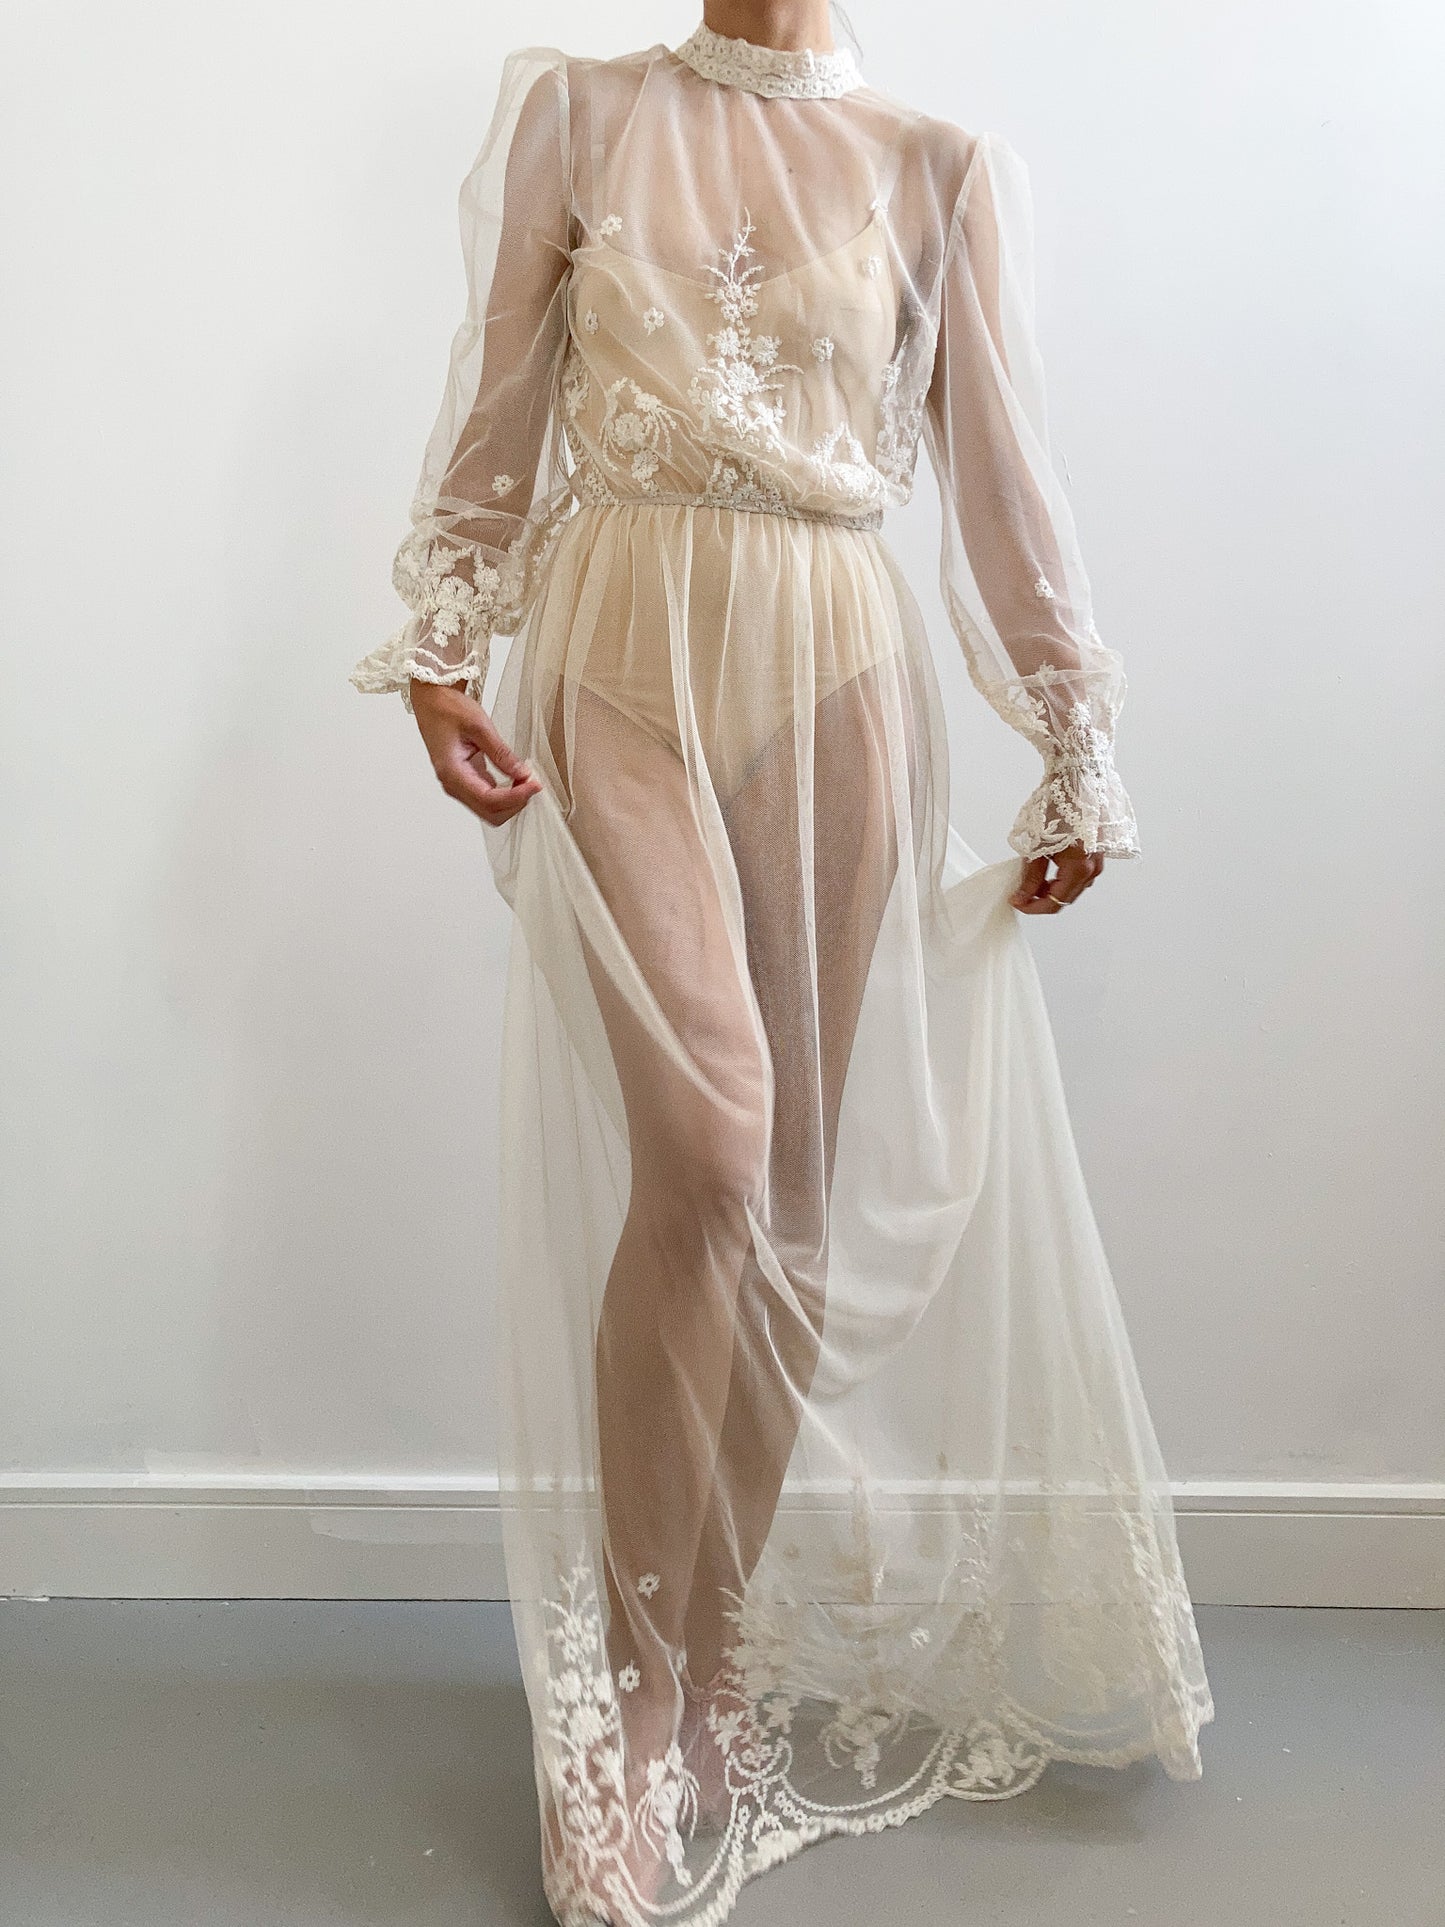 Vintage Sheer Net Wedding Dress with Flower Embroidery